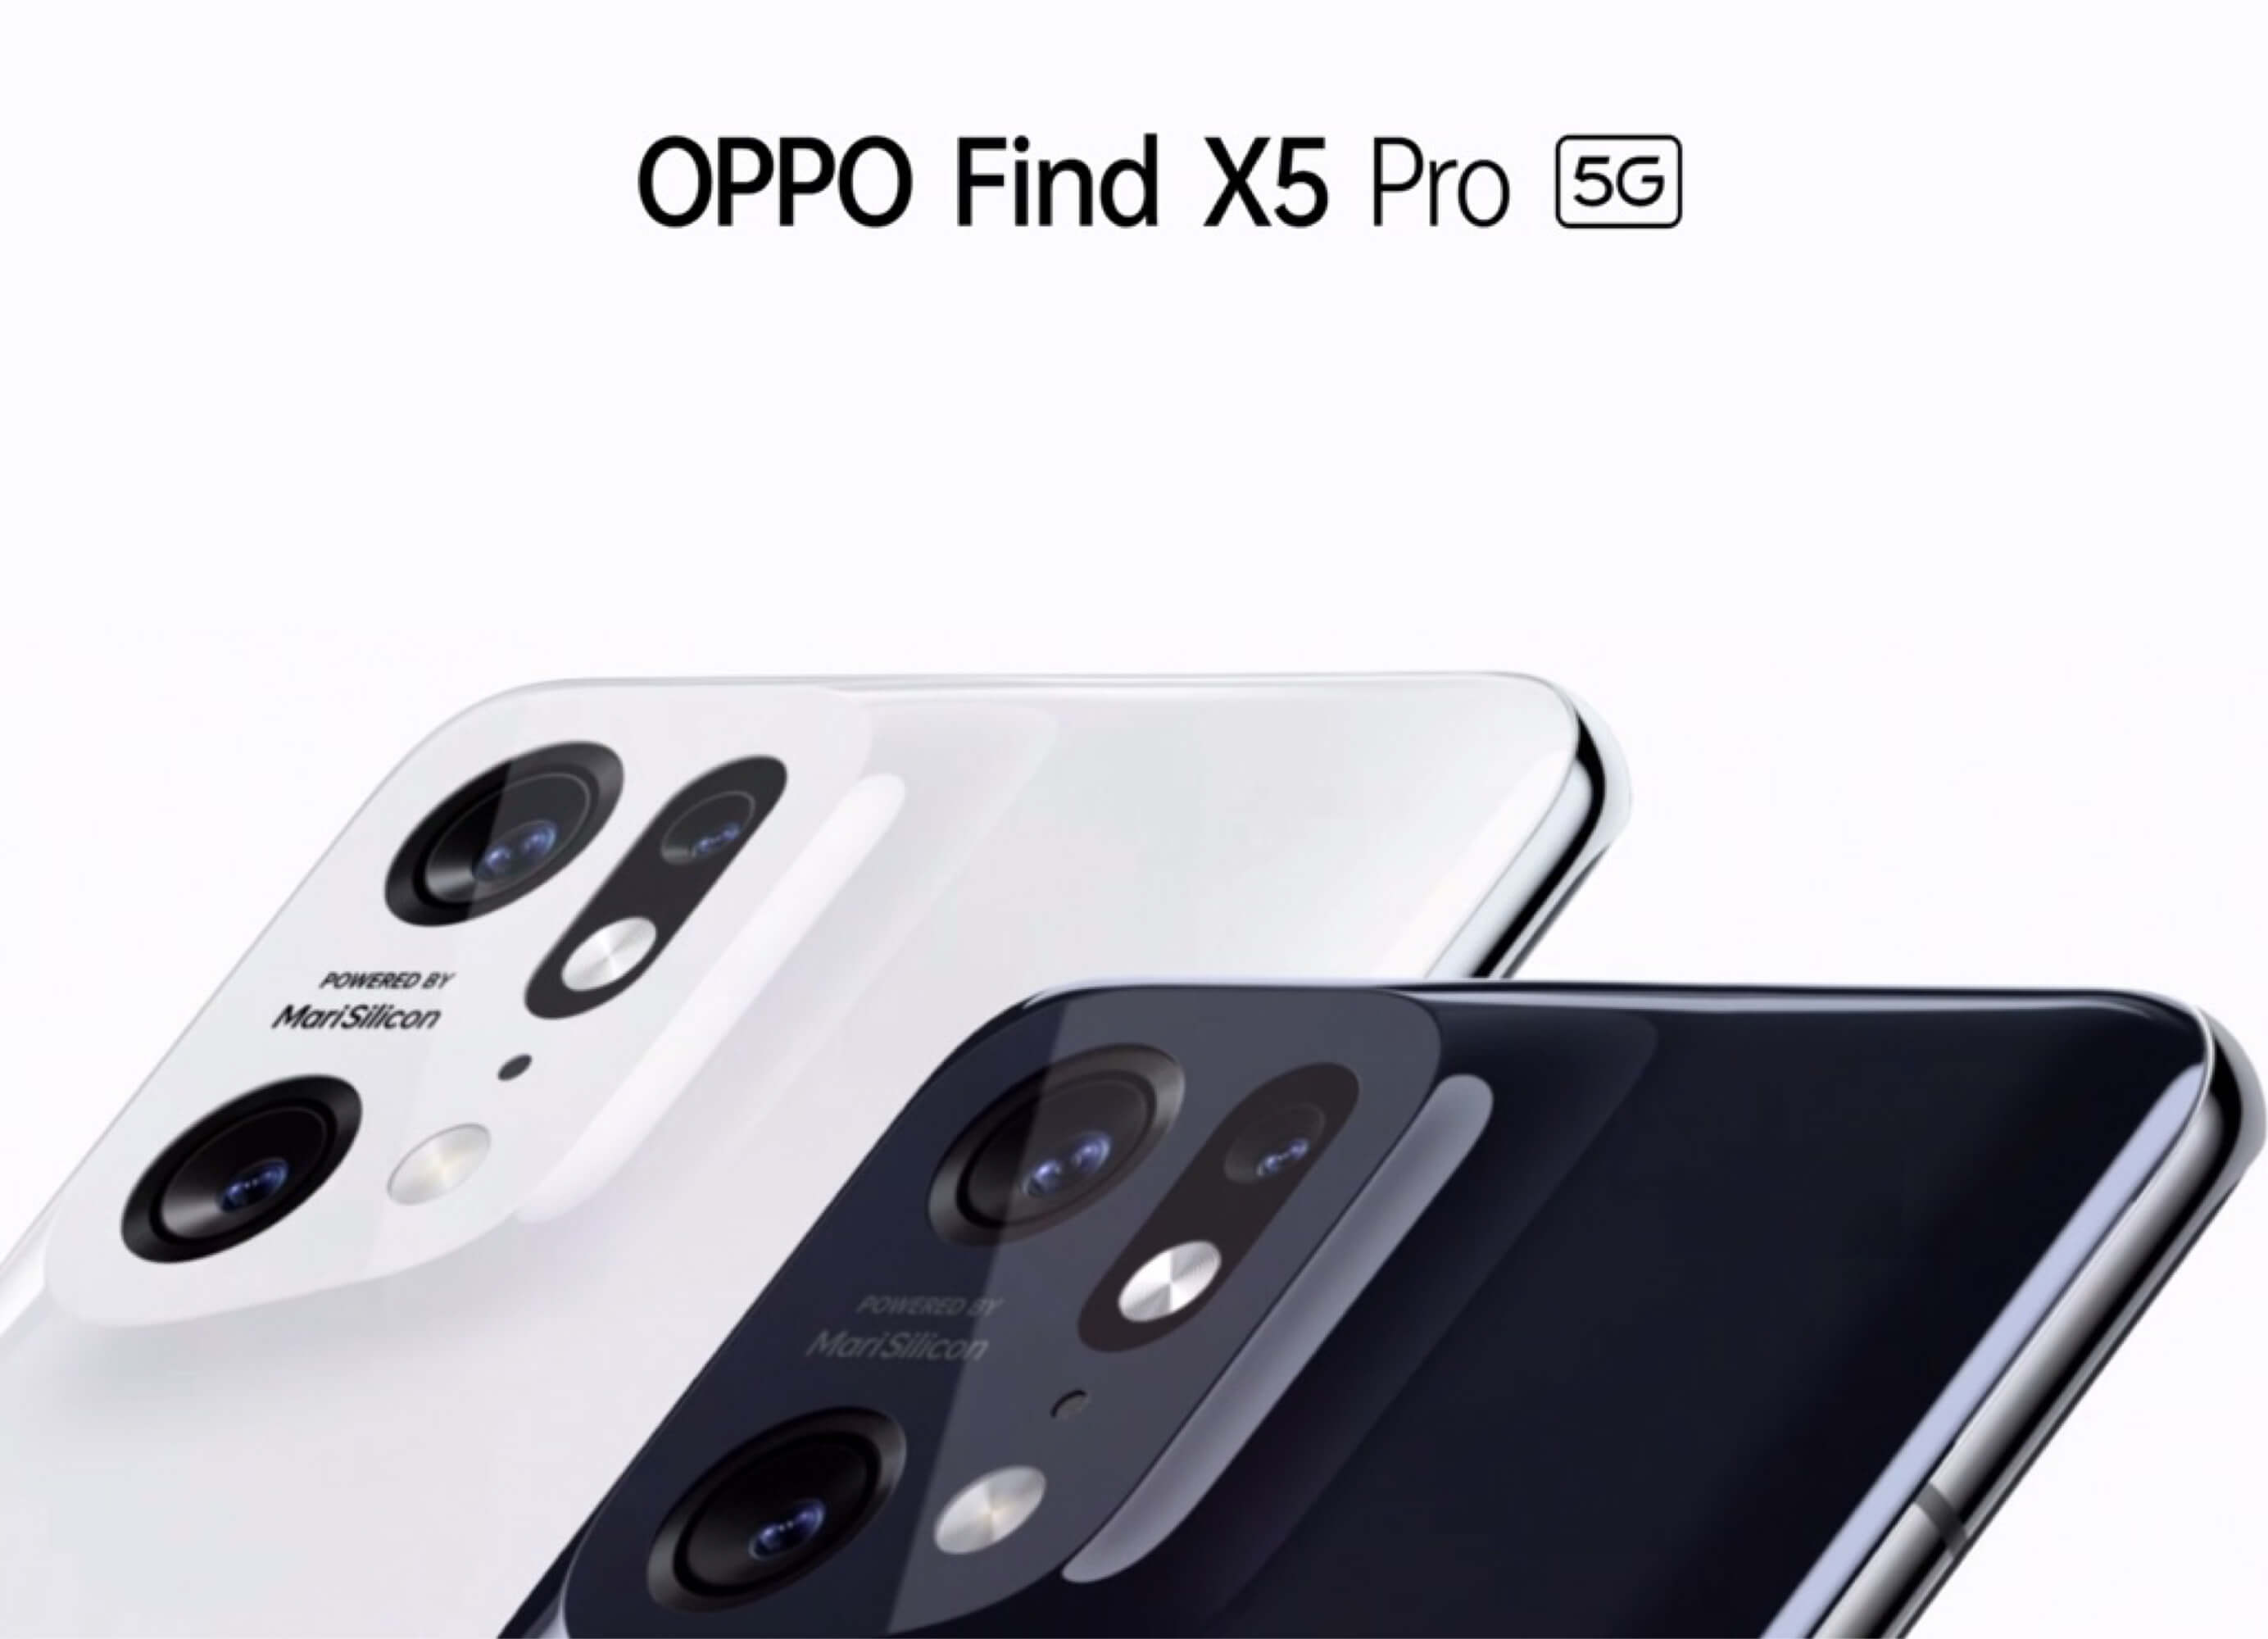 Oppo Find X5 Pro 5G devices displayed in black & white colours.